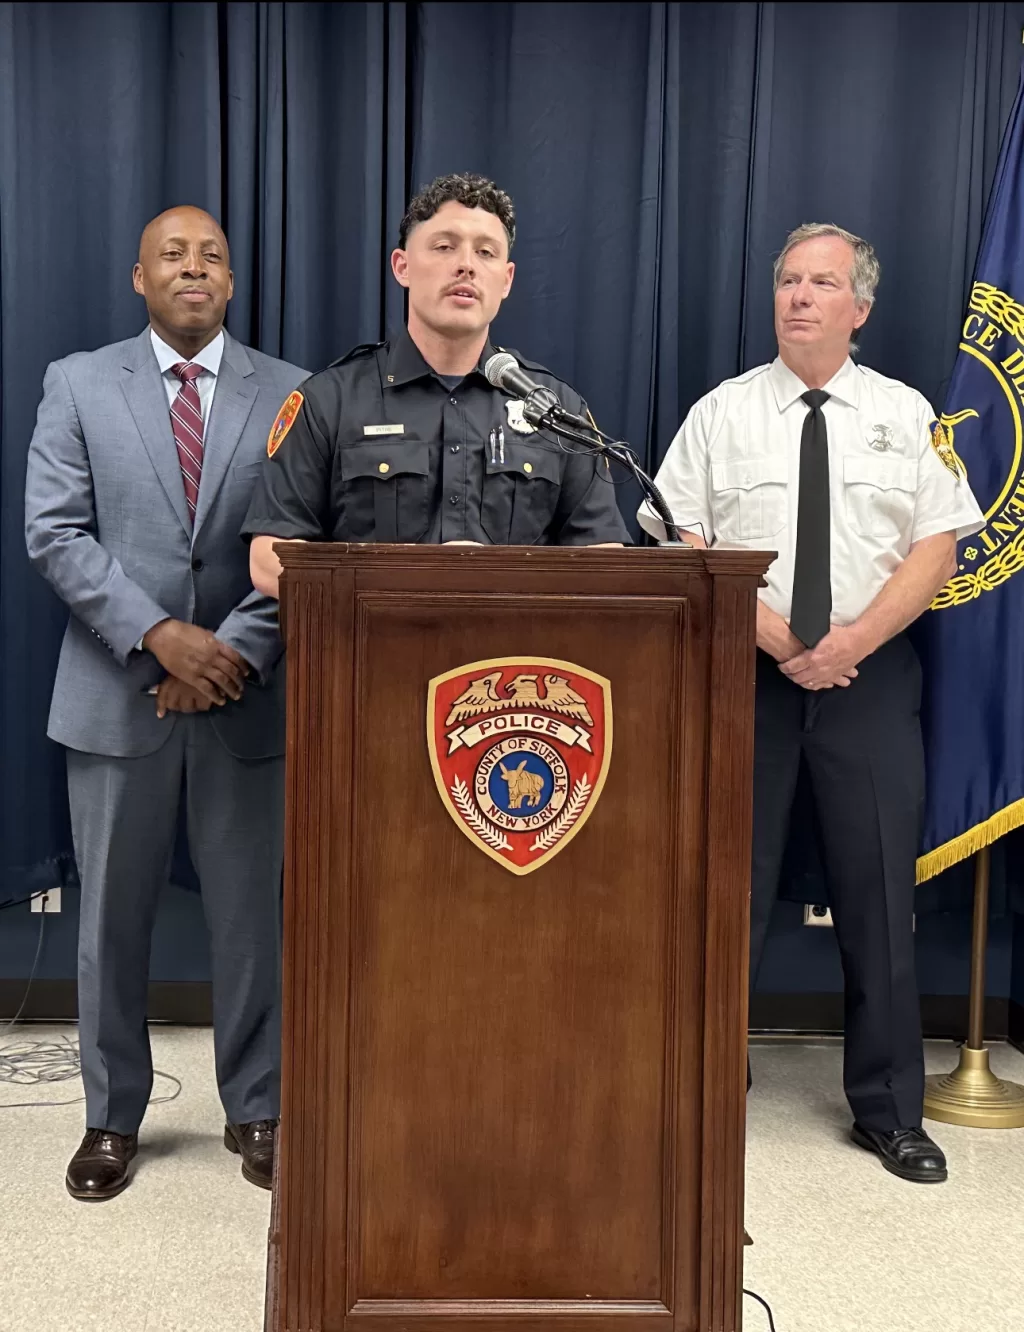 (Photo Courtesy of the SCPD) Suffolk County Police Officer Edward Pitre (standing behind podium) discusses the rescue he performed with Patchogue Fire Department firefighter Peter Feehan (right) during a June 15 press conference at SCPD headquarters in Yaphank. Also pictured is Suffolk County Police Commissioner Rodney Harrison (left).